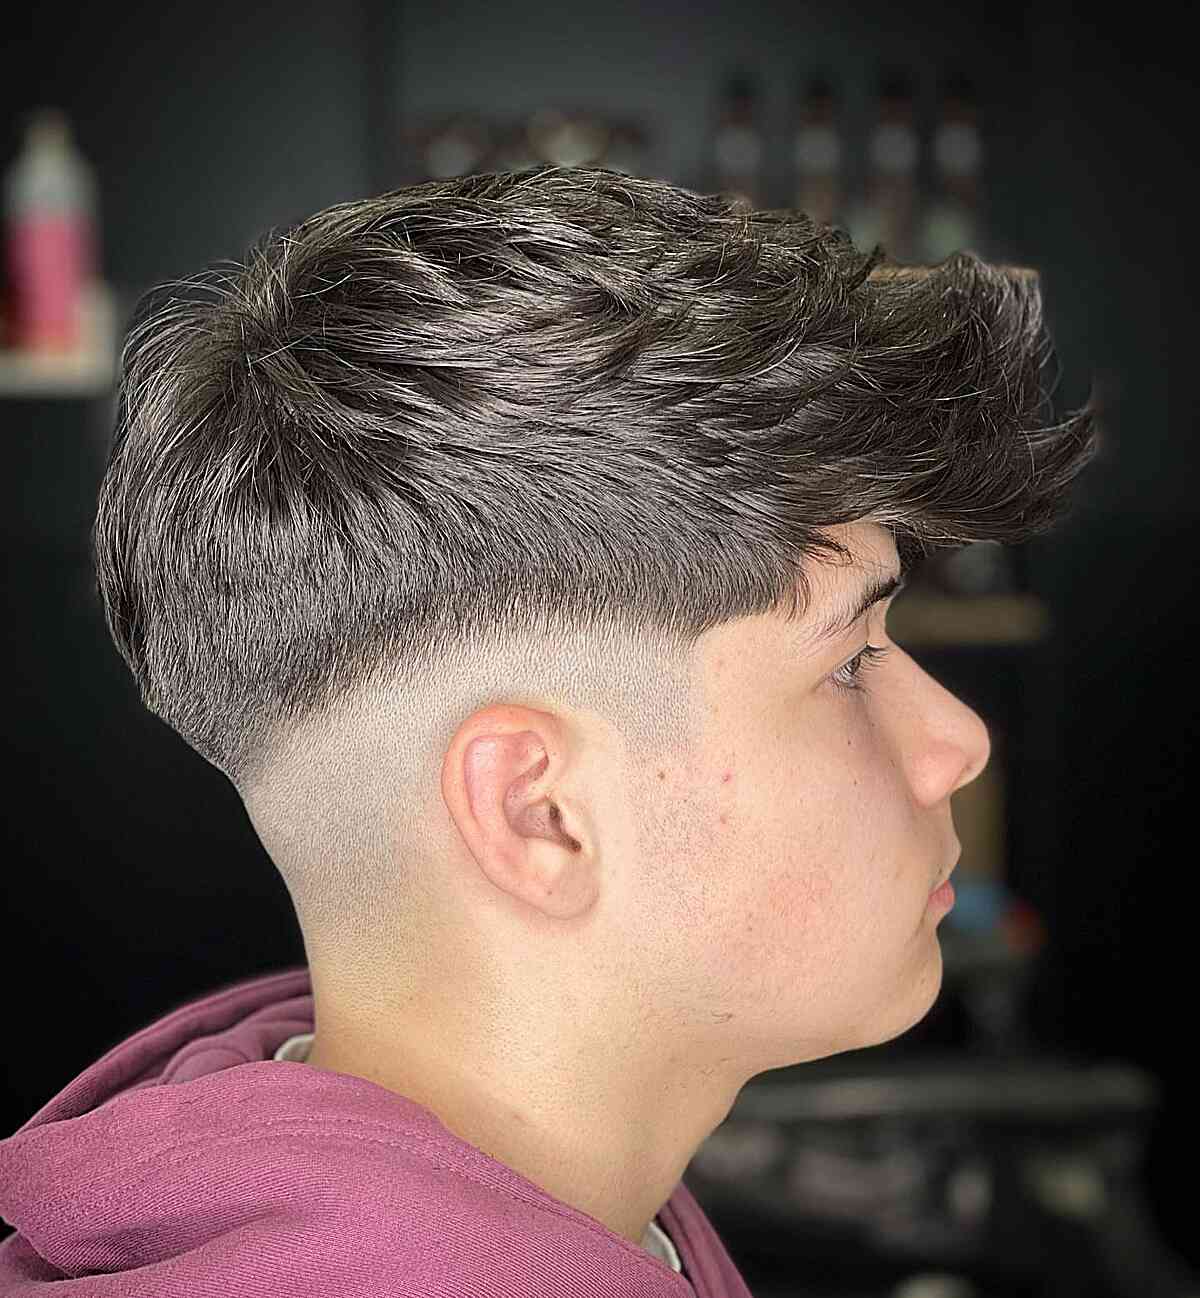 Mid Fade with a Long Fohawk Style for Boys in their Teens